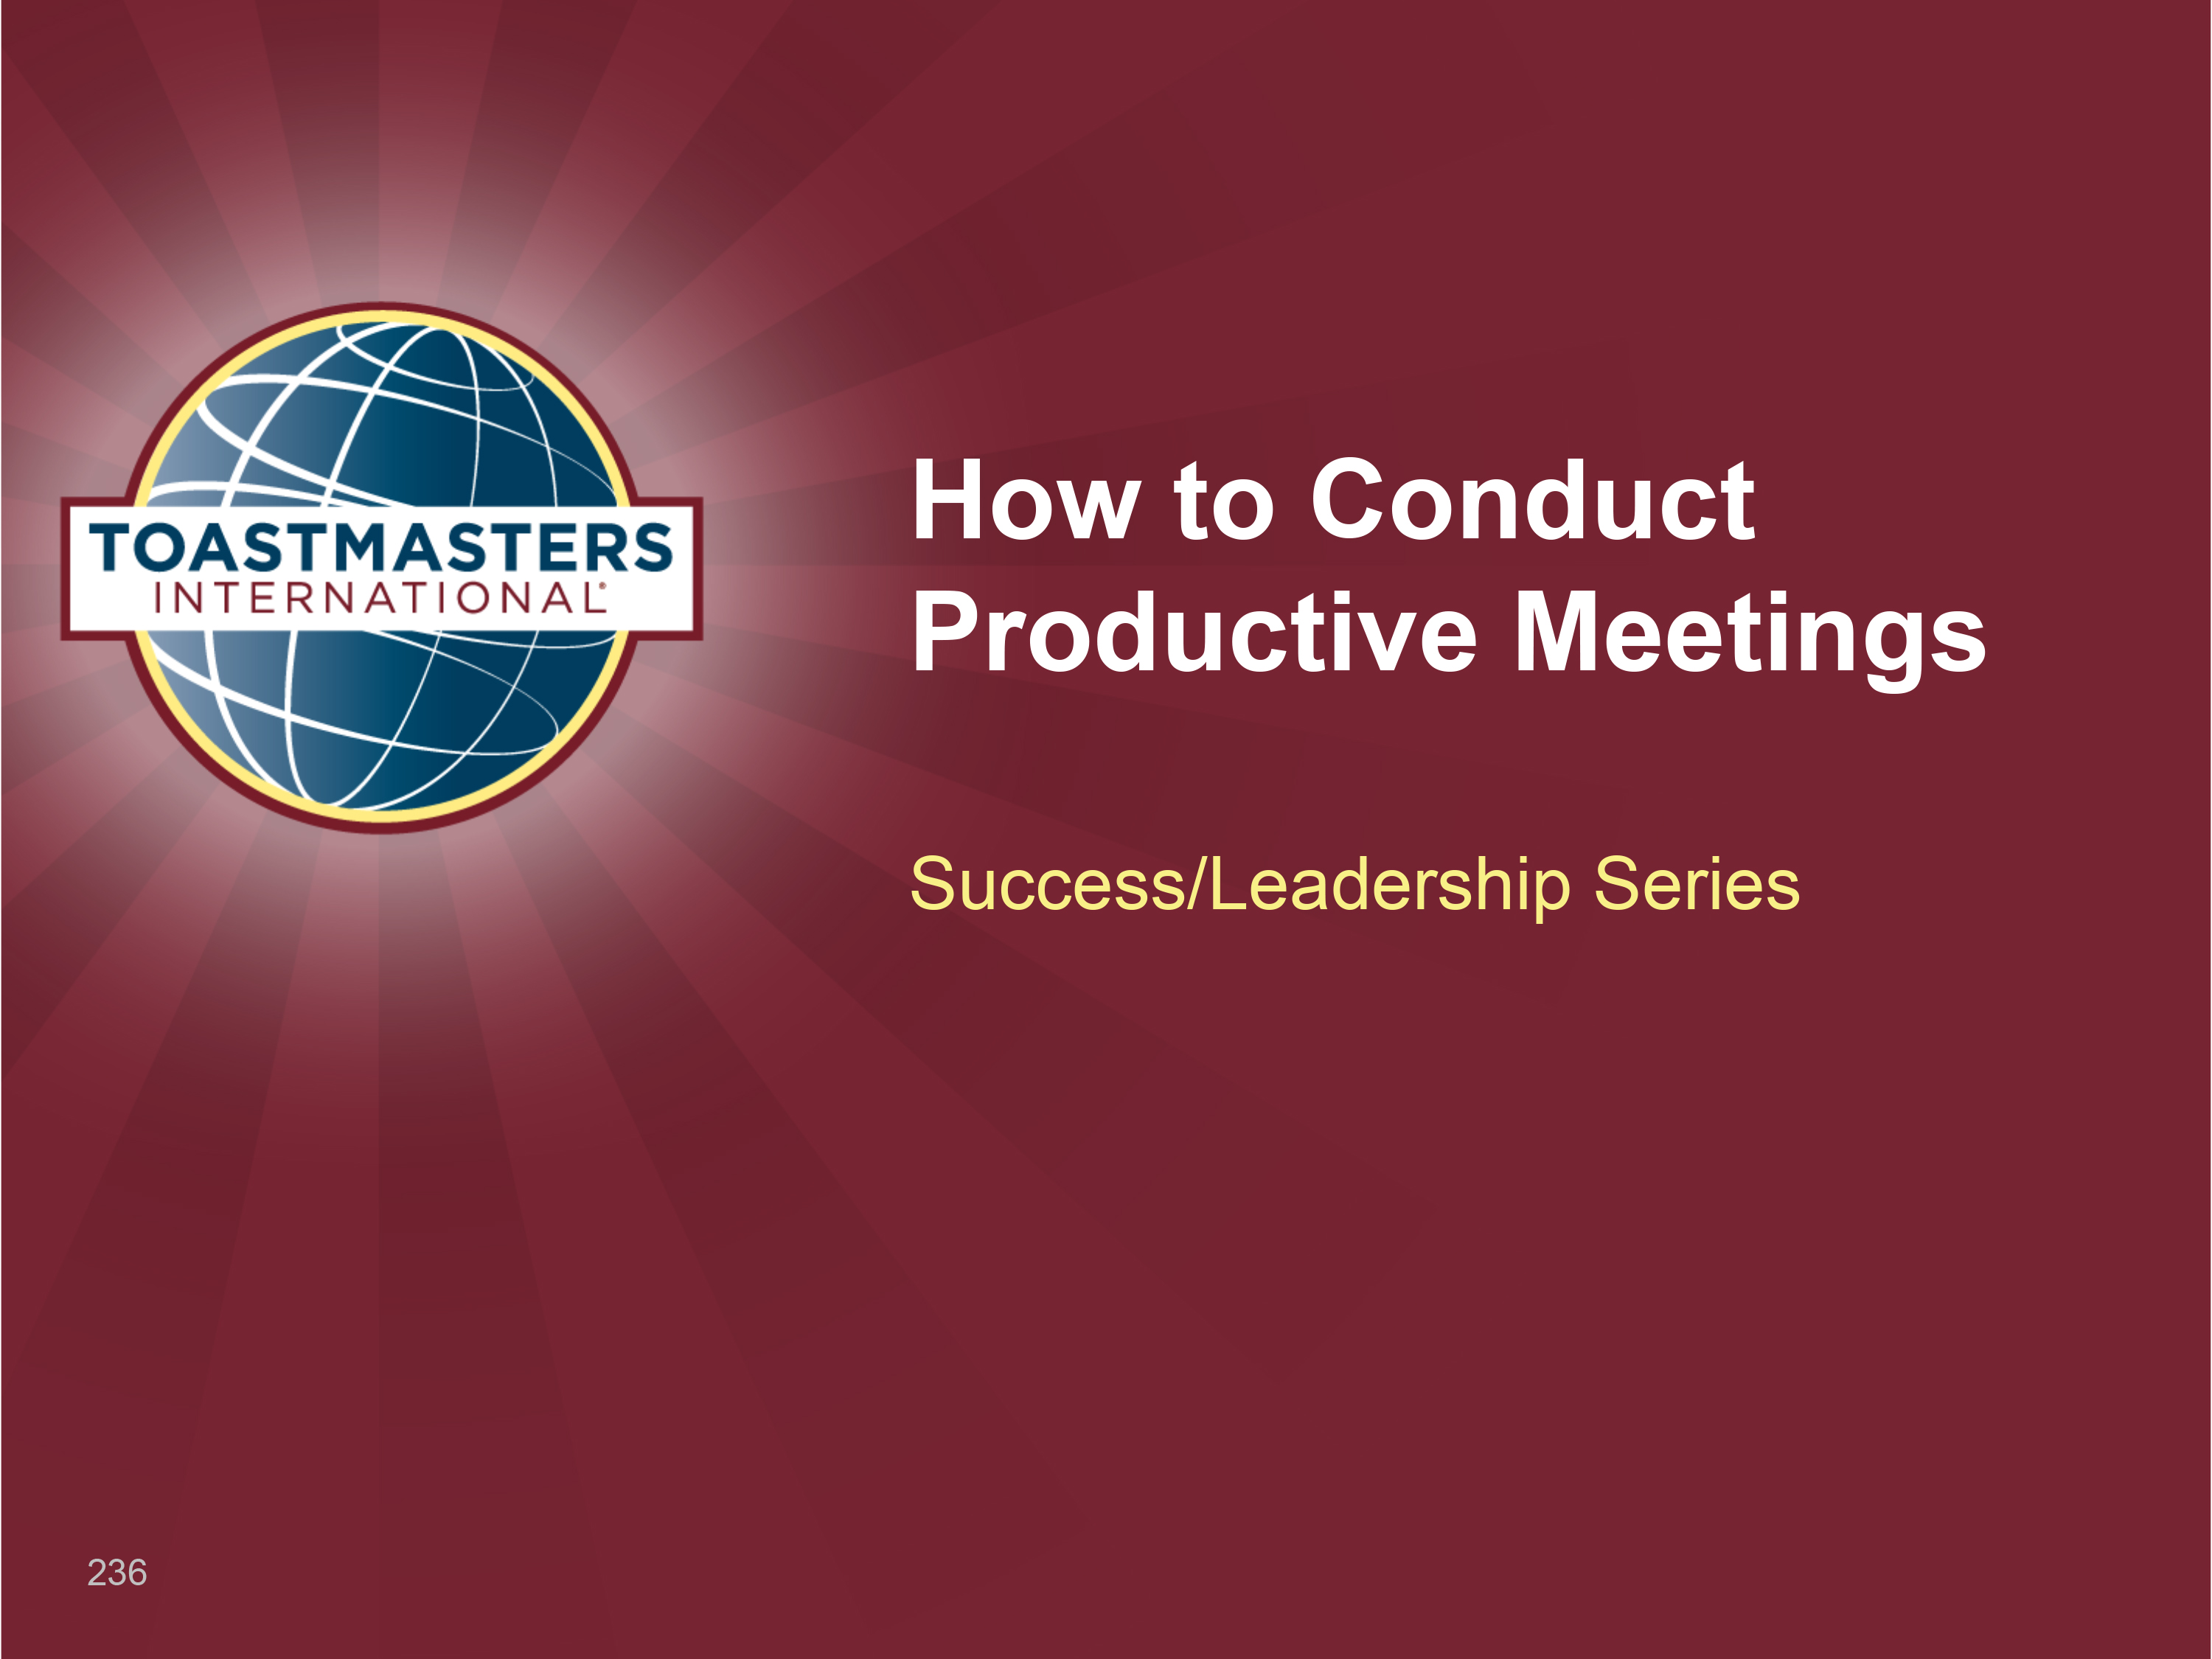 How to Conduct Productive Meetings Workshop (PPT)